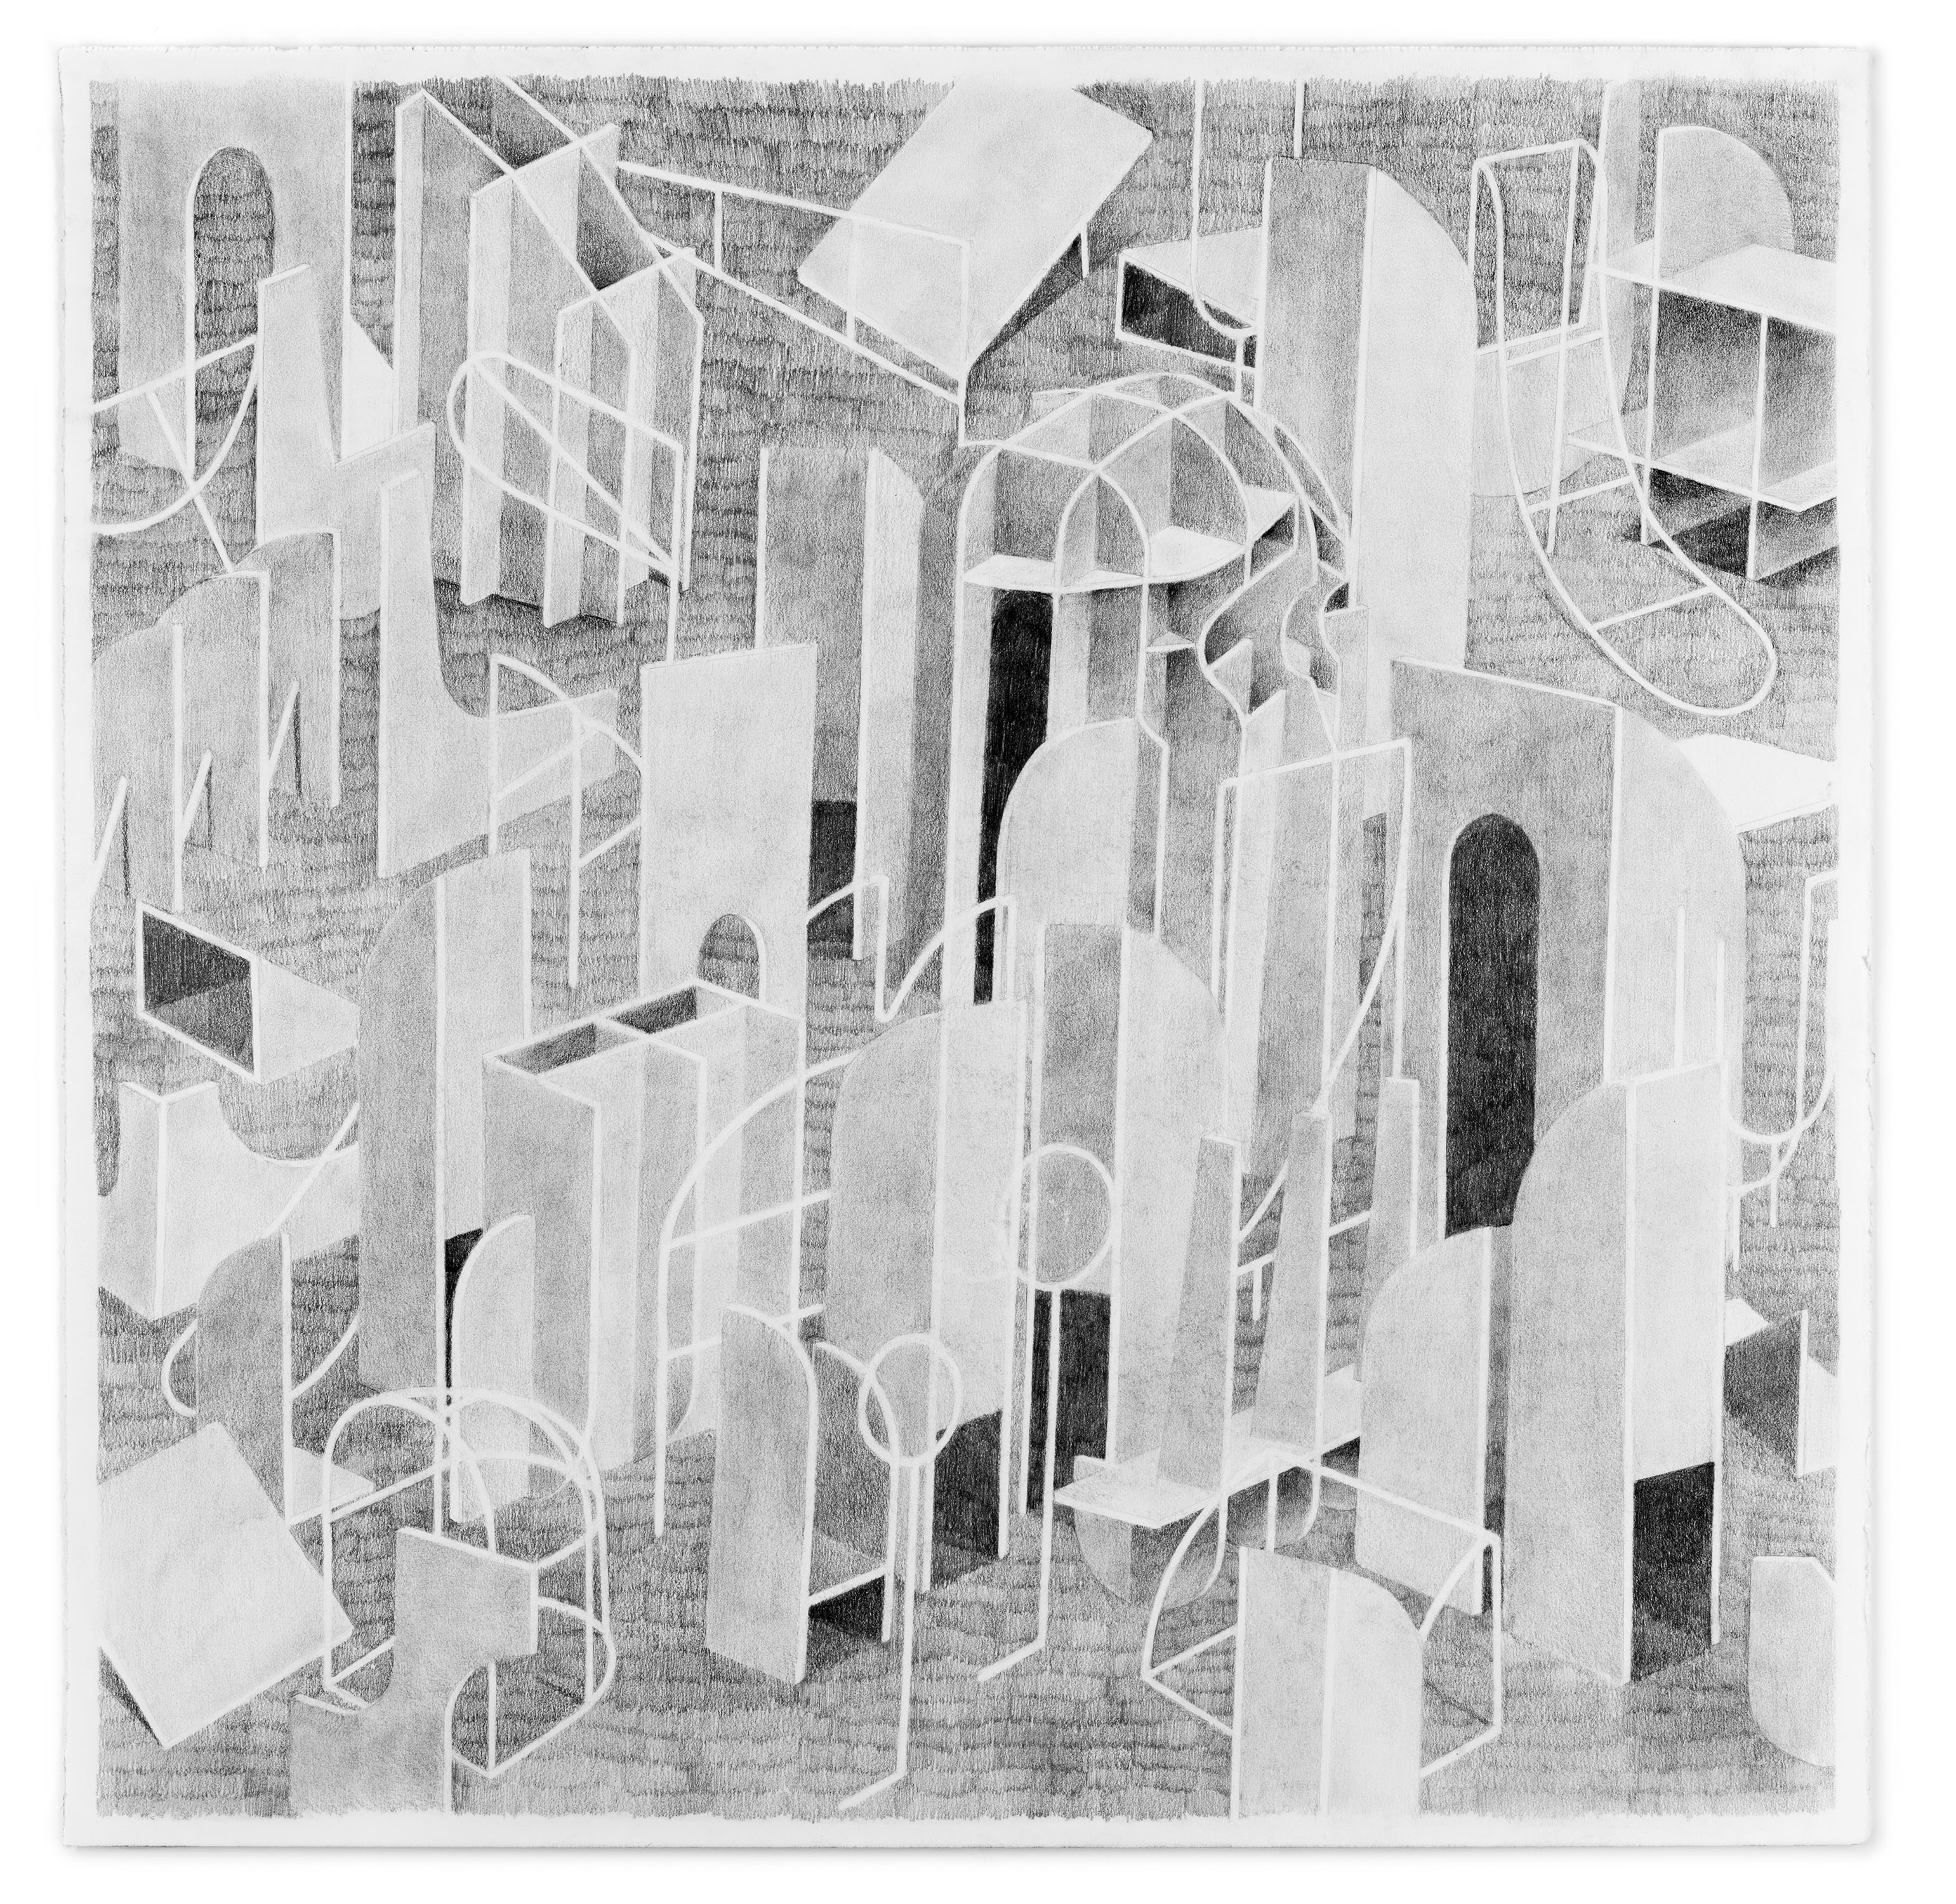 Kat Chamberlin, "Call and Response" graphite on paper, 2017, 25 x 25